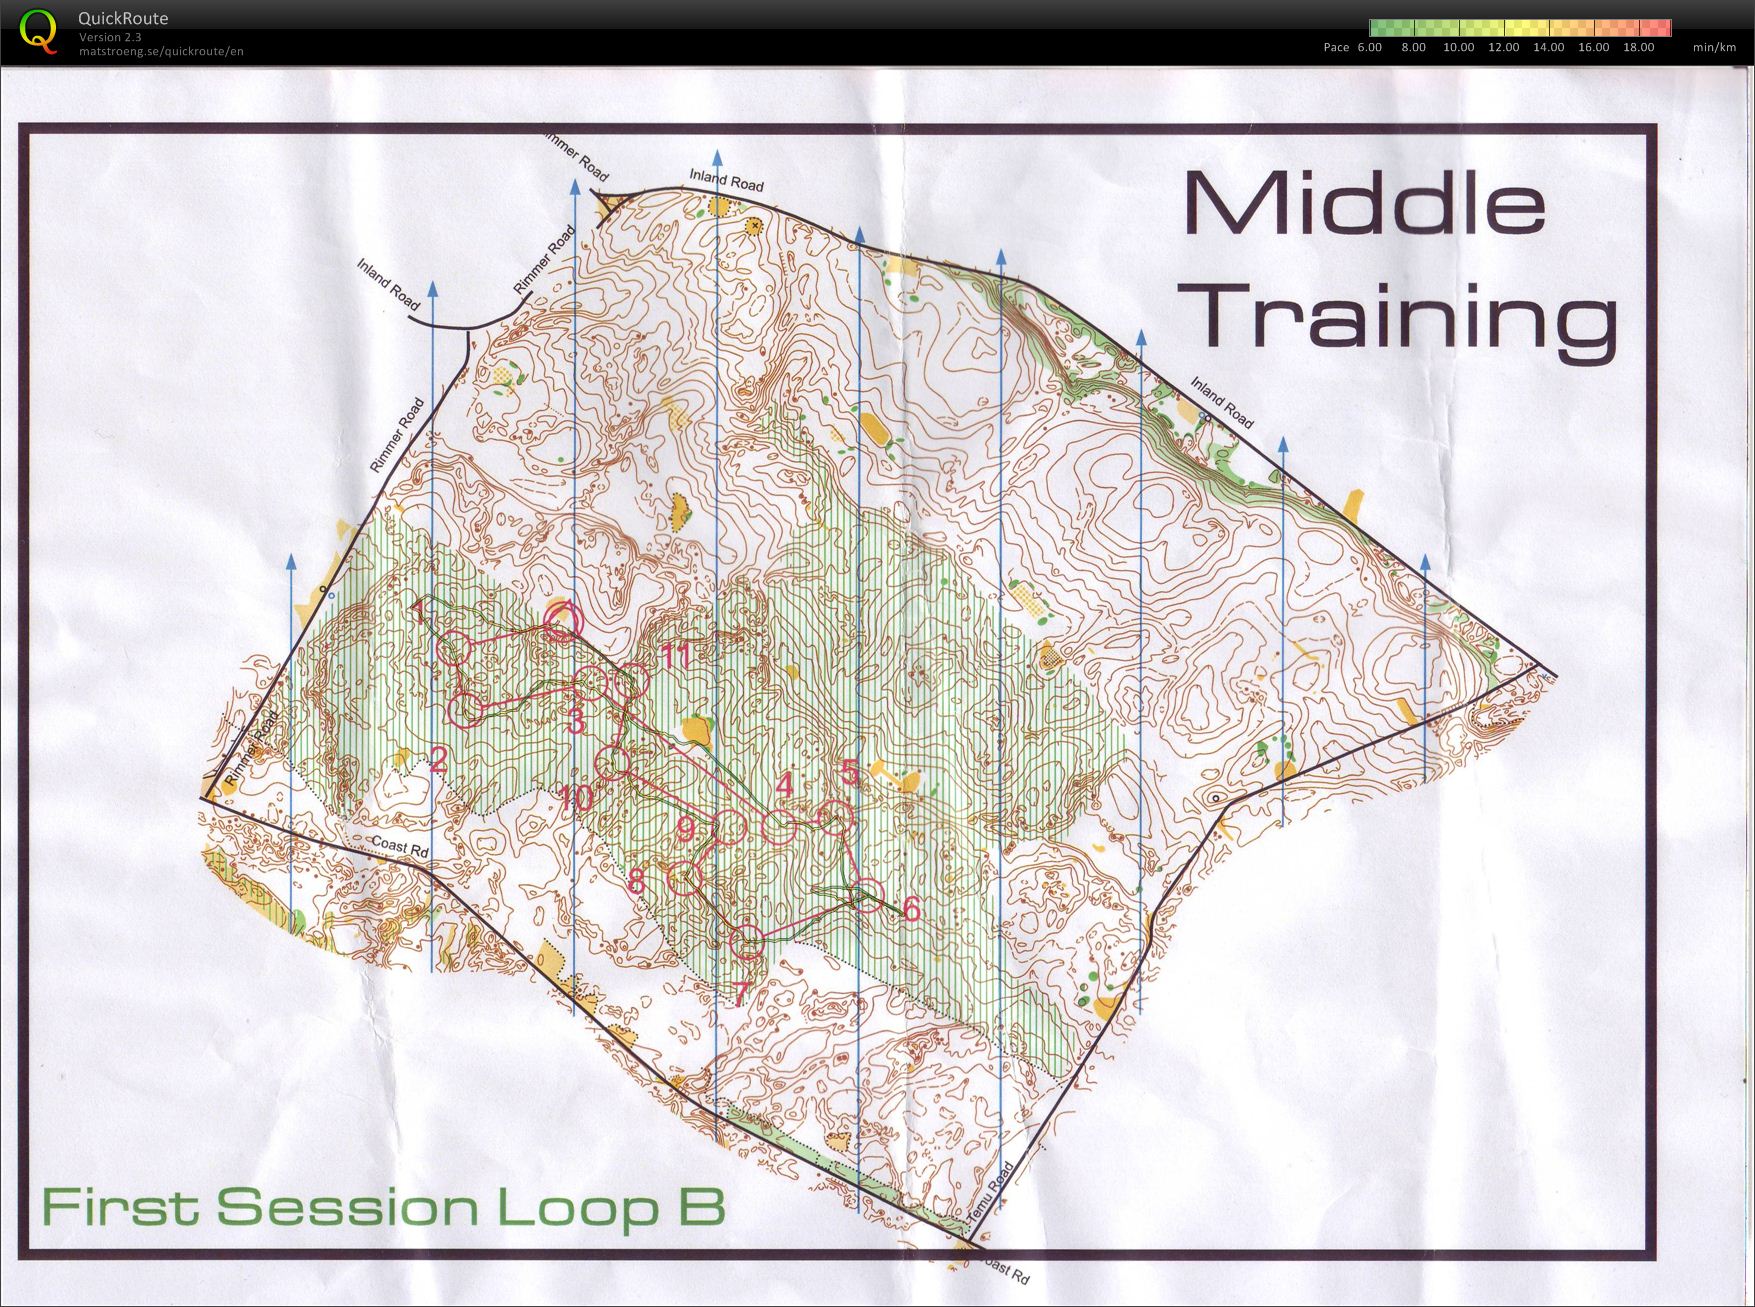 Middle Training - Rimmer Rd (30/03/2012)